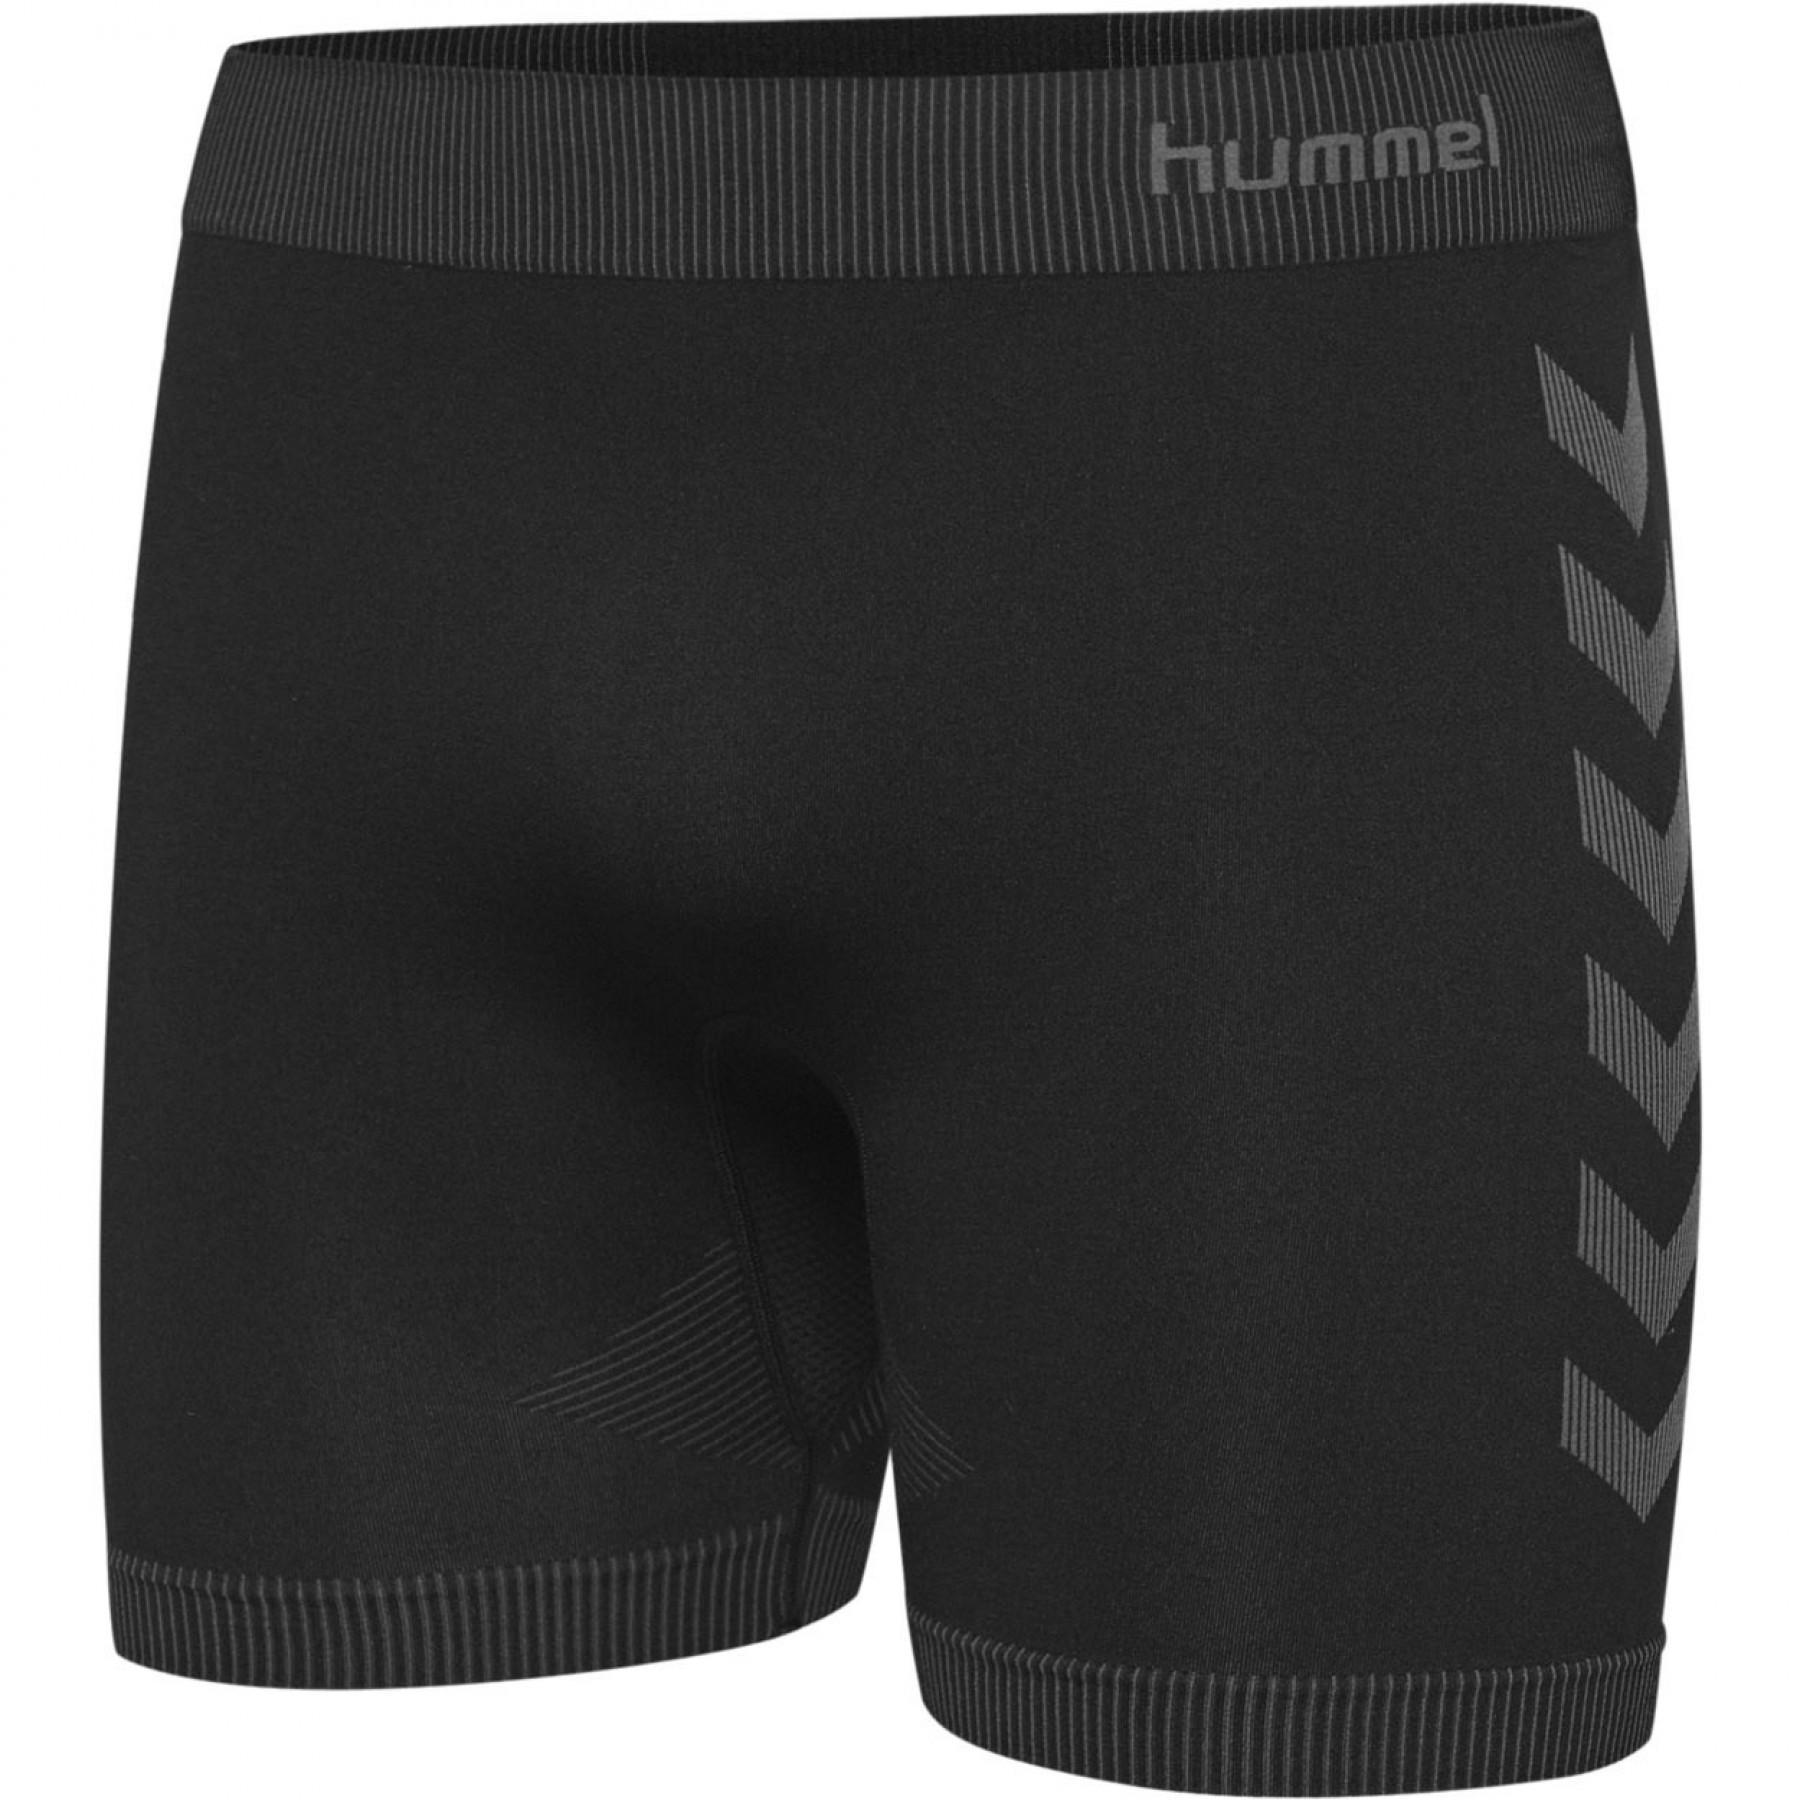 HUMMEL - FIRST SEAMLESS TRAINING TIGHTS Size XS/S